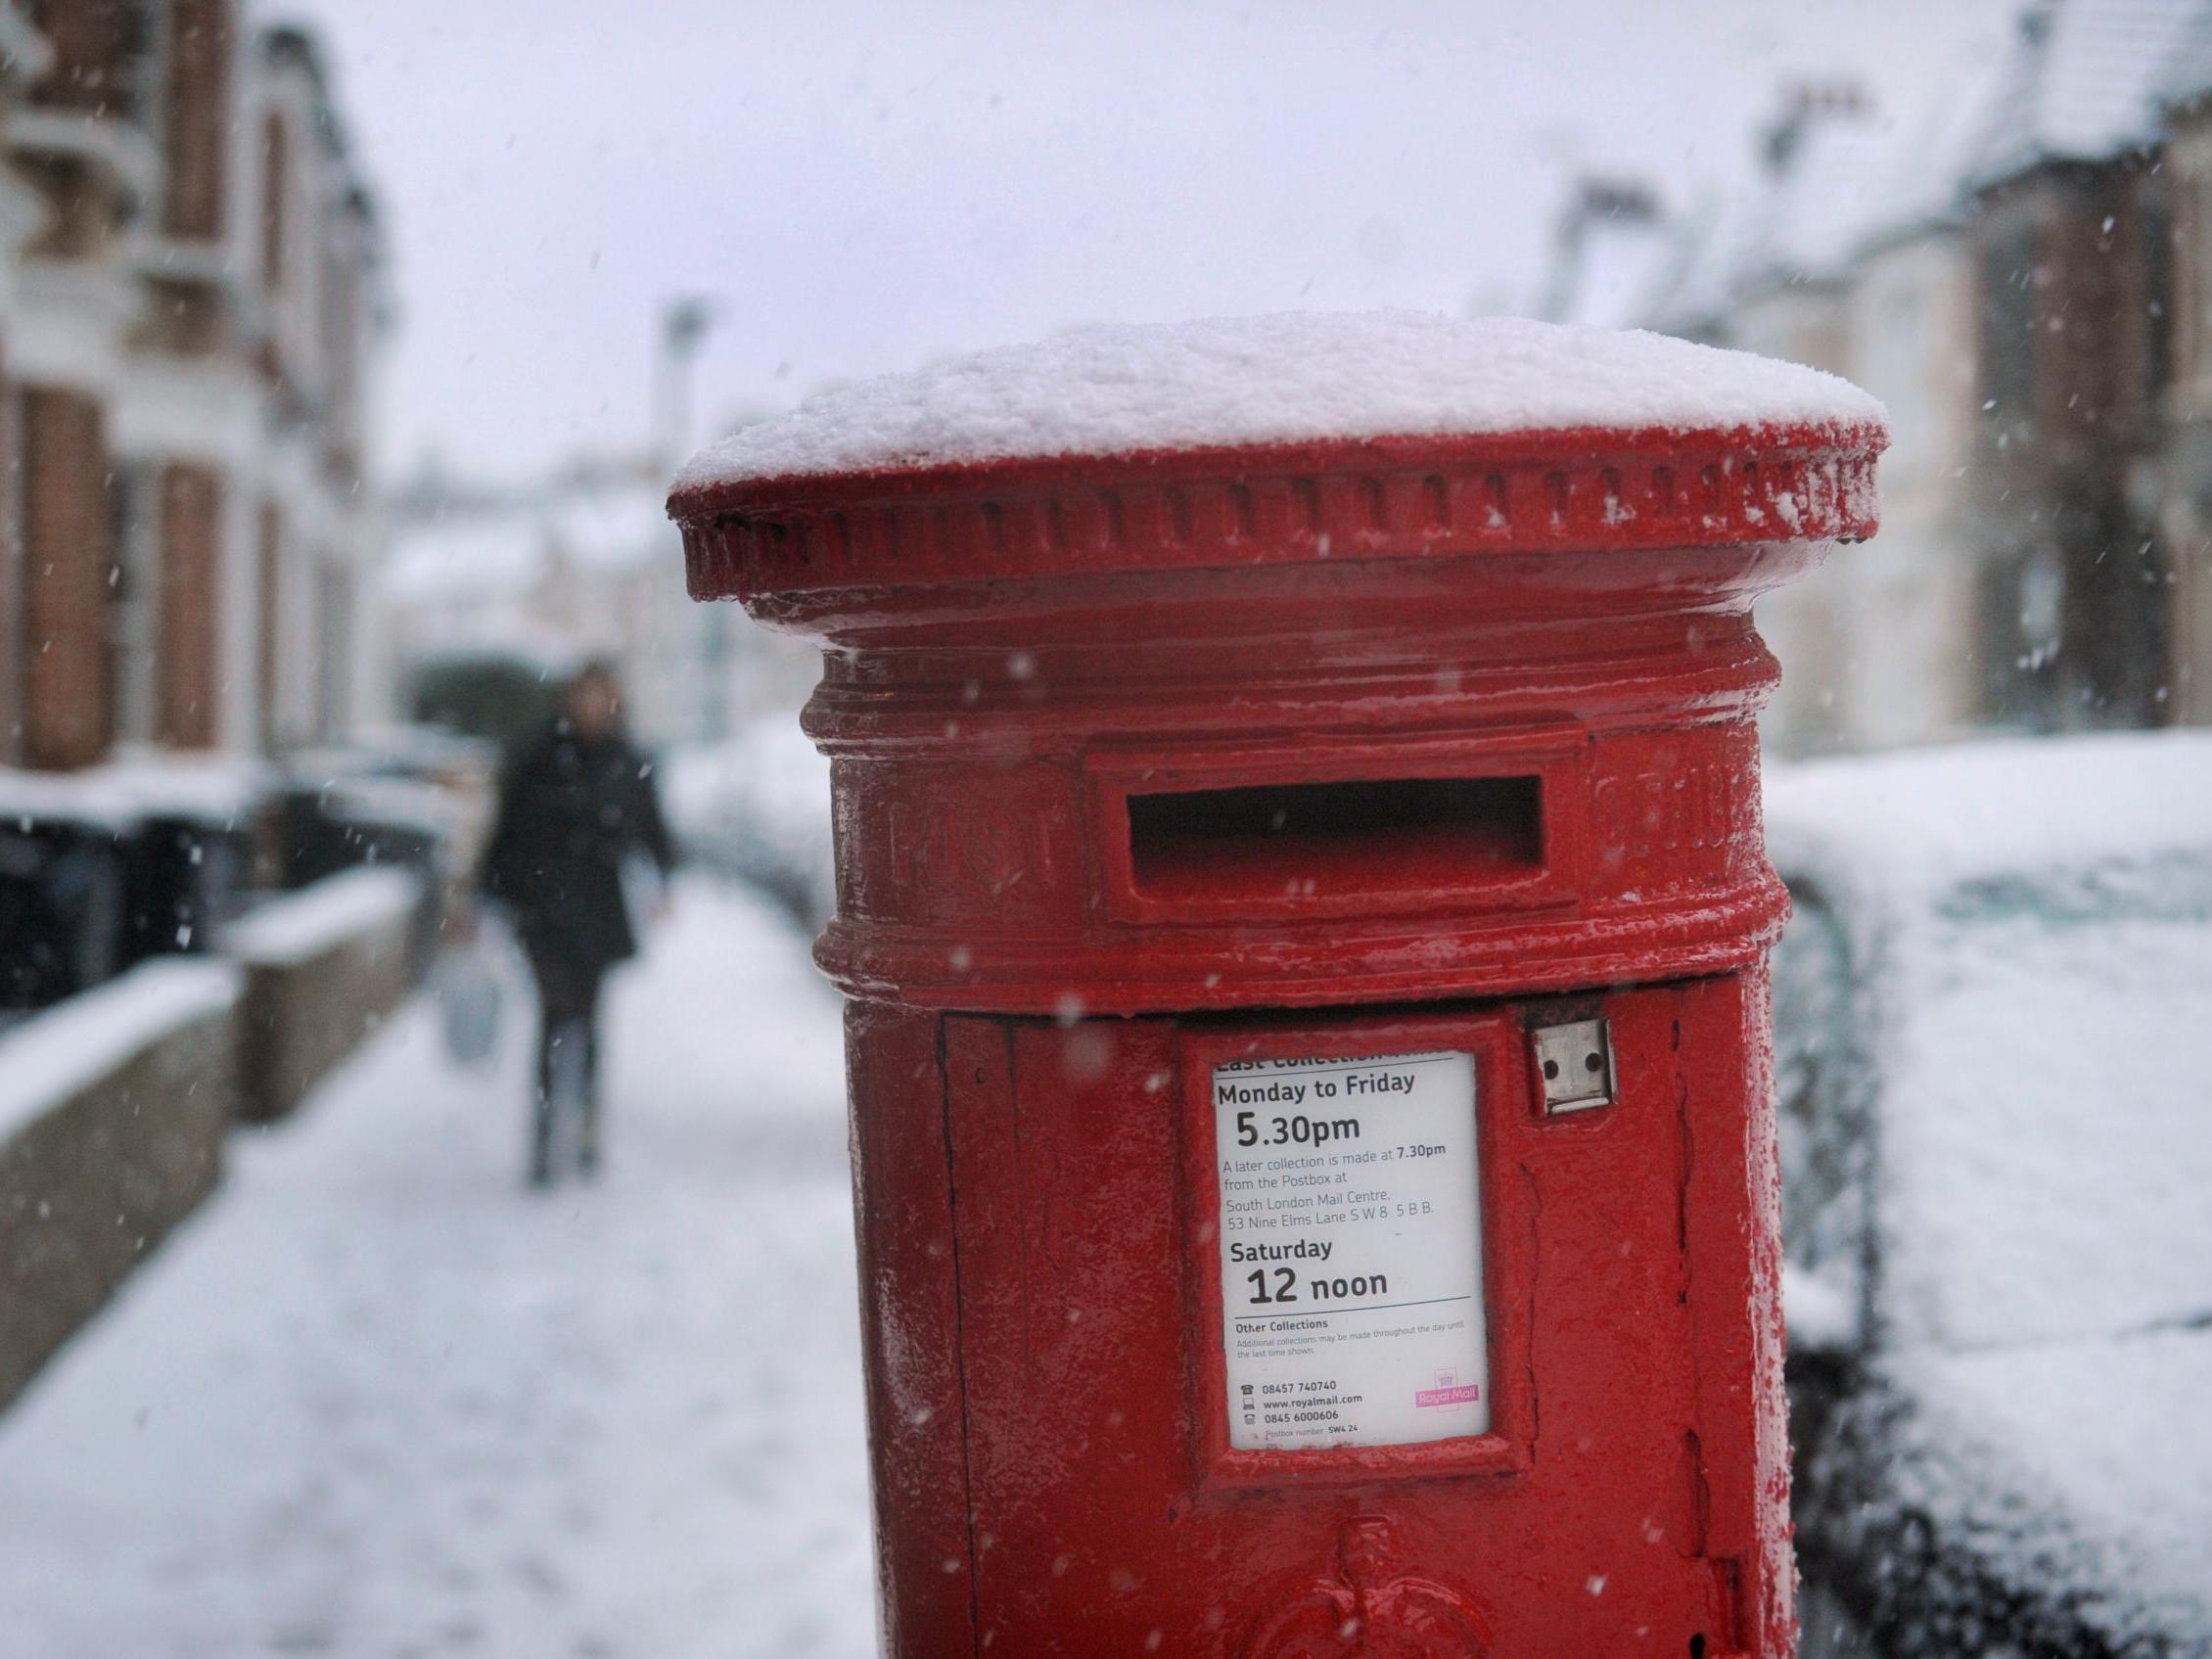 Time is fast running out to send your festive post